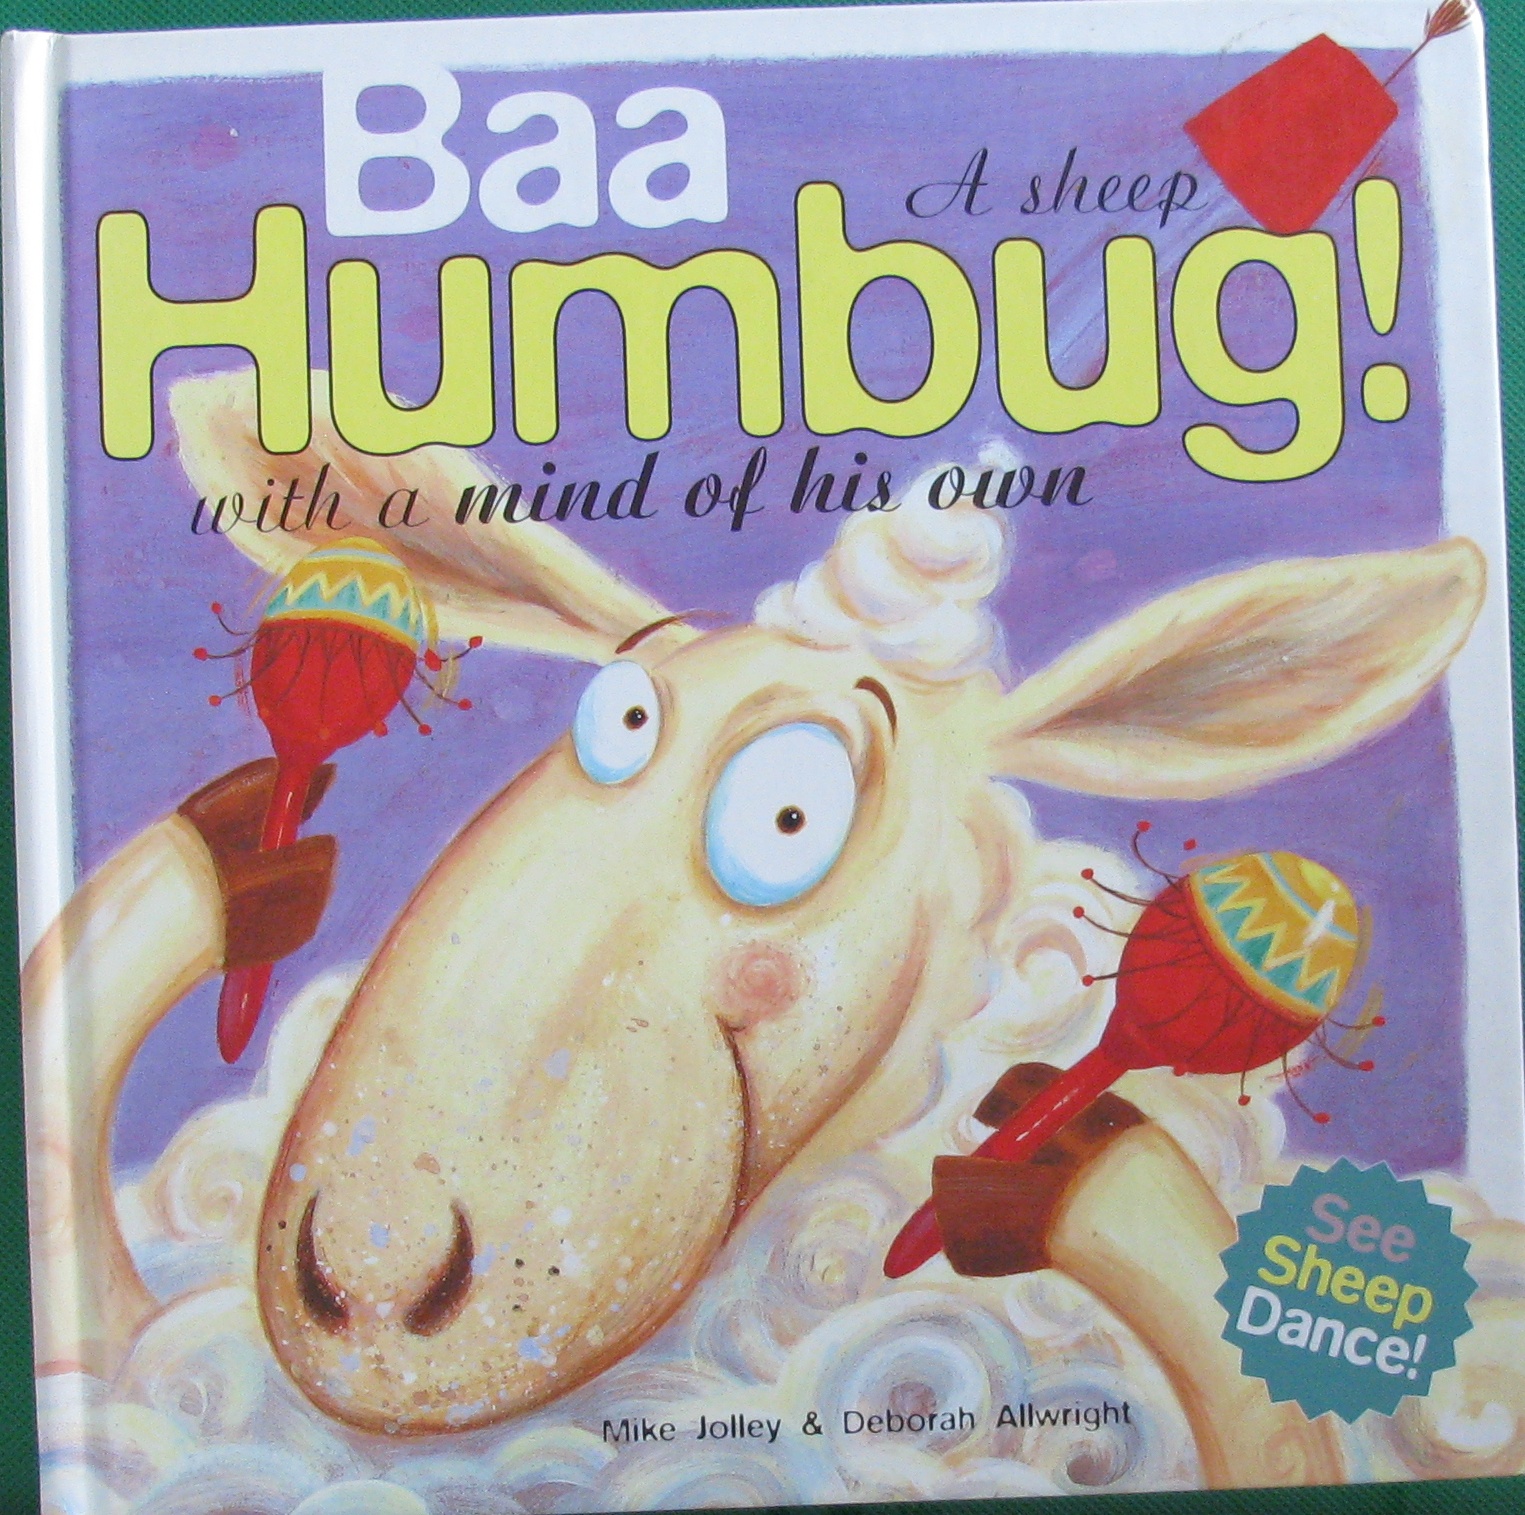 baa humbug!: a sheep with a mind of his own